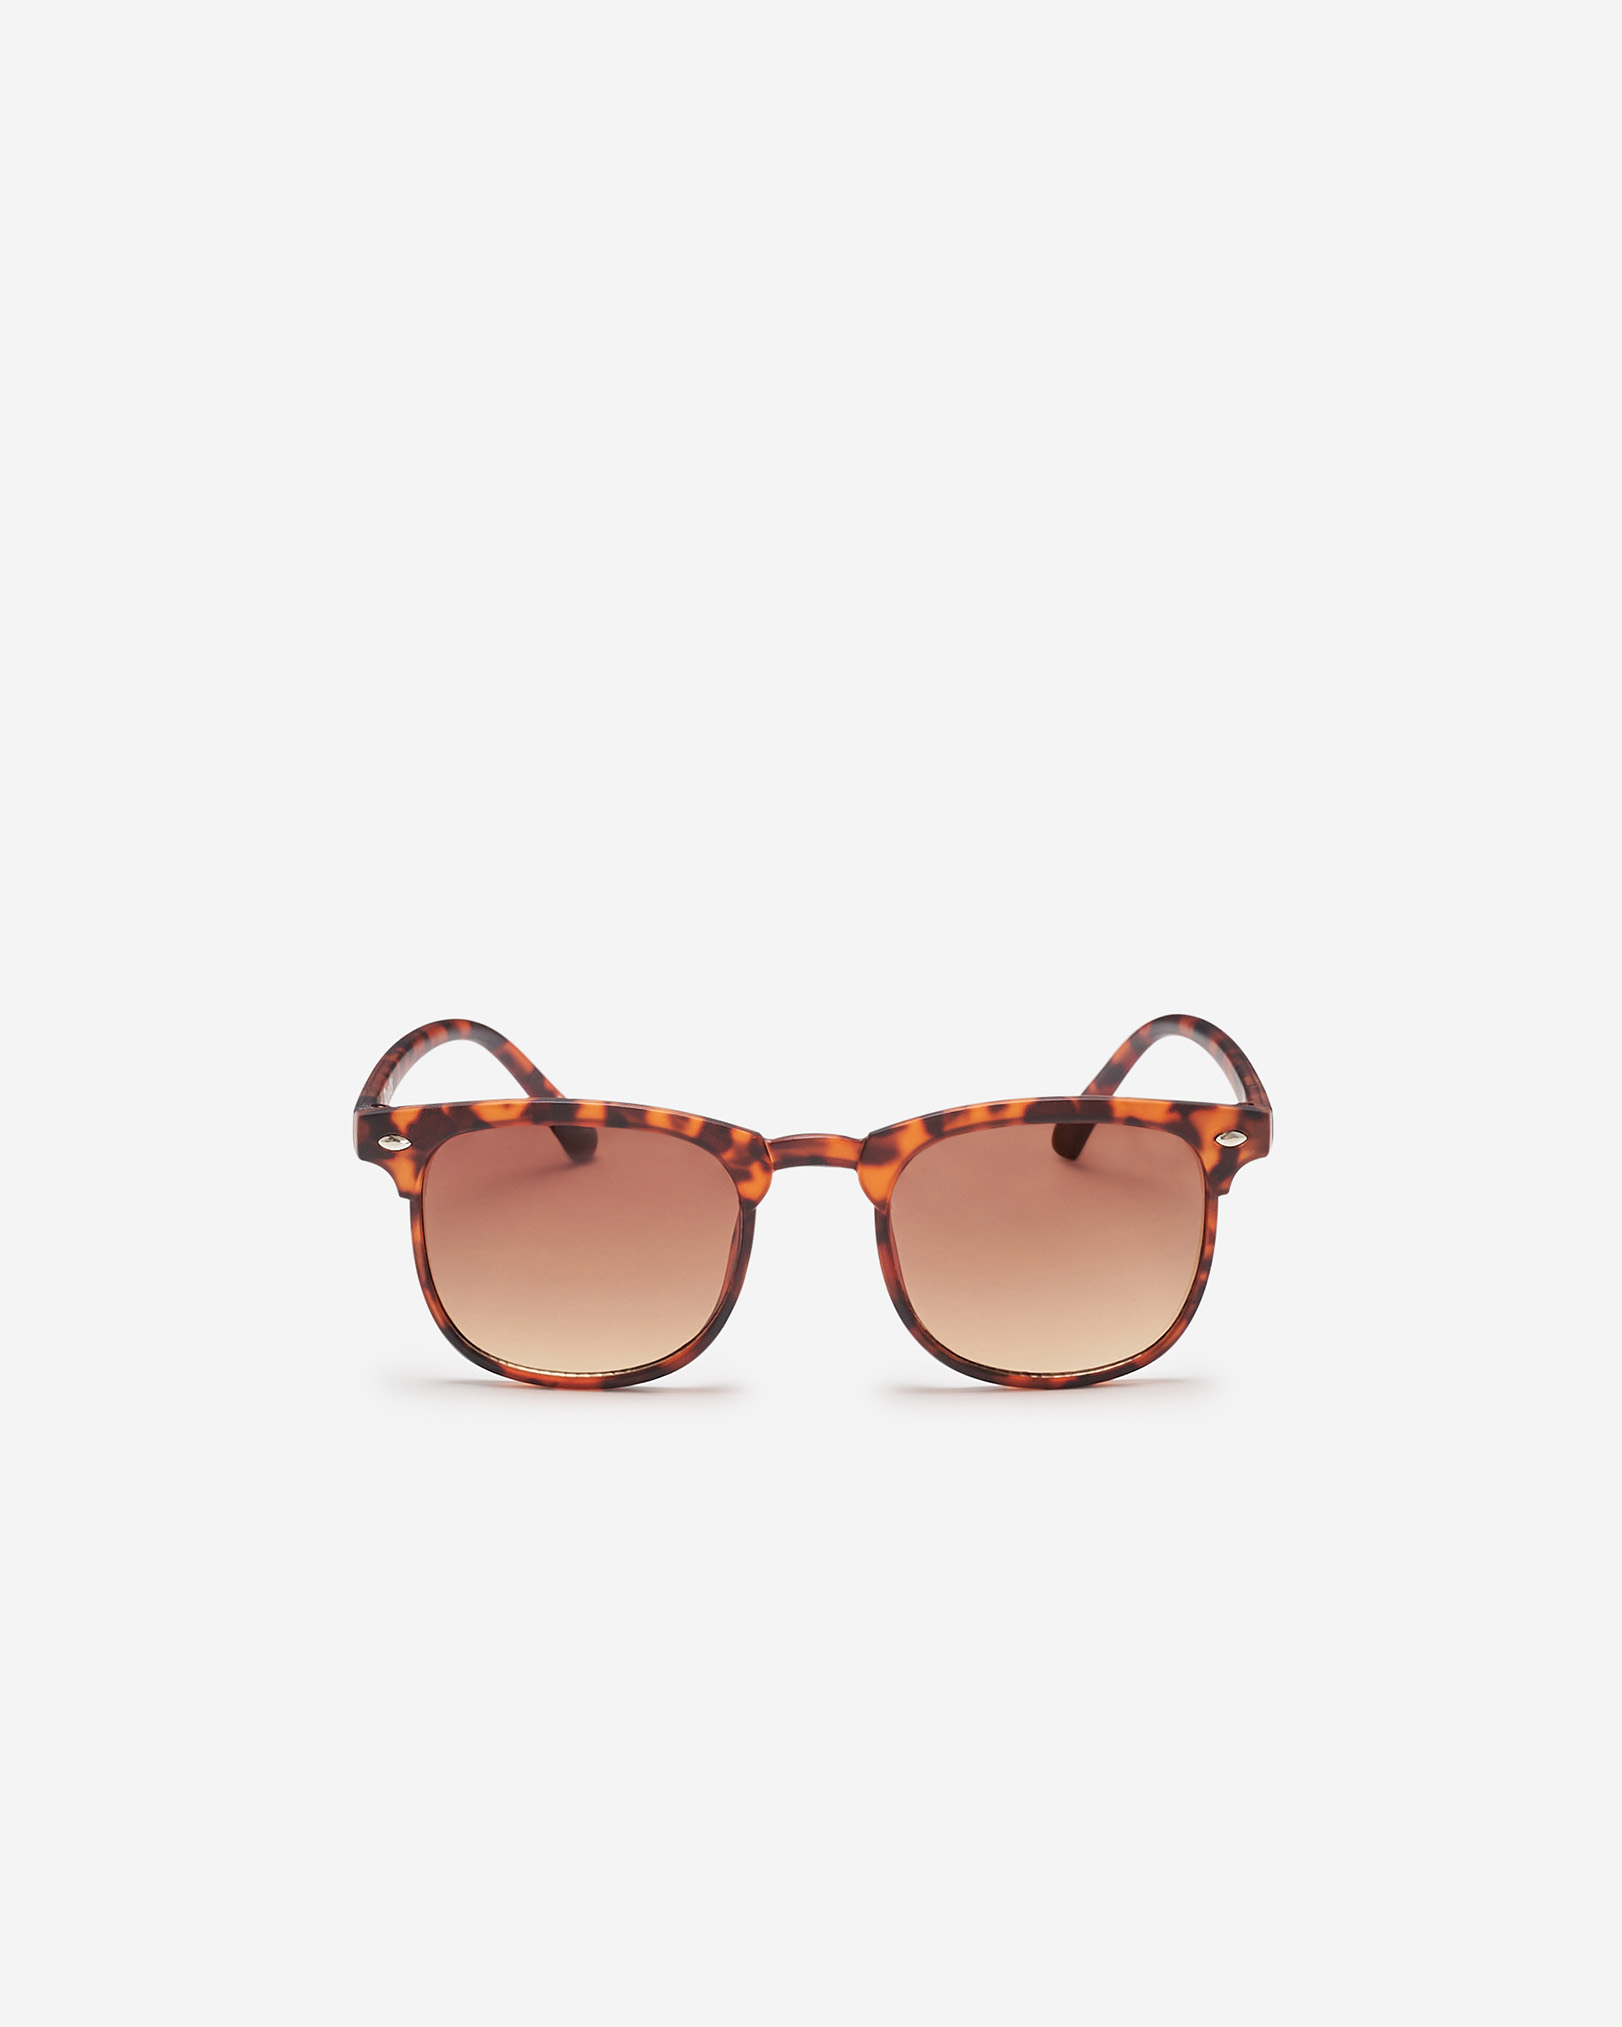 Roots Kids Clubmaster Sunglasses in Tortoise